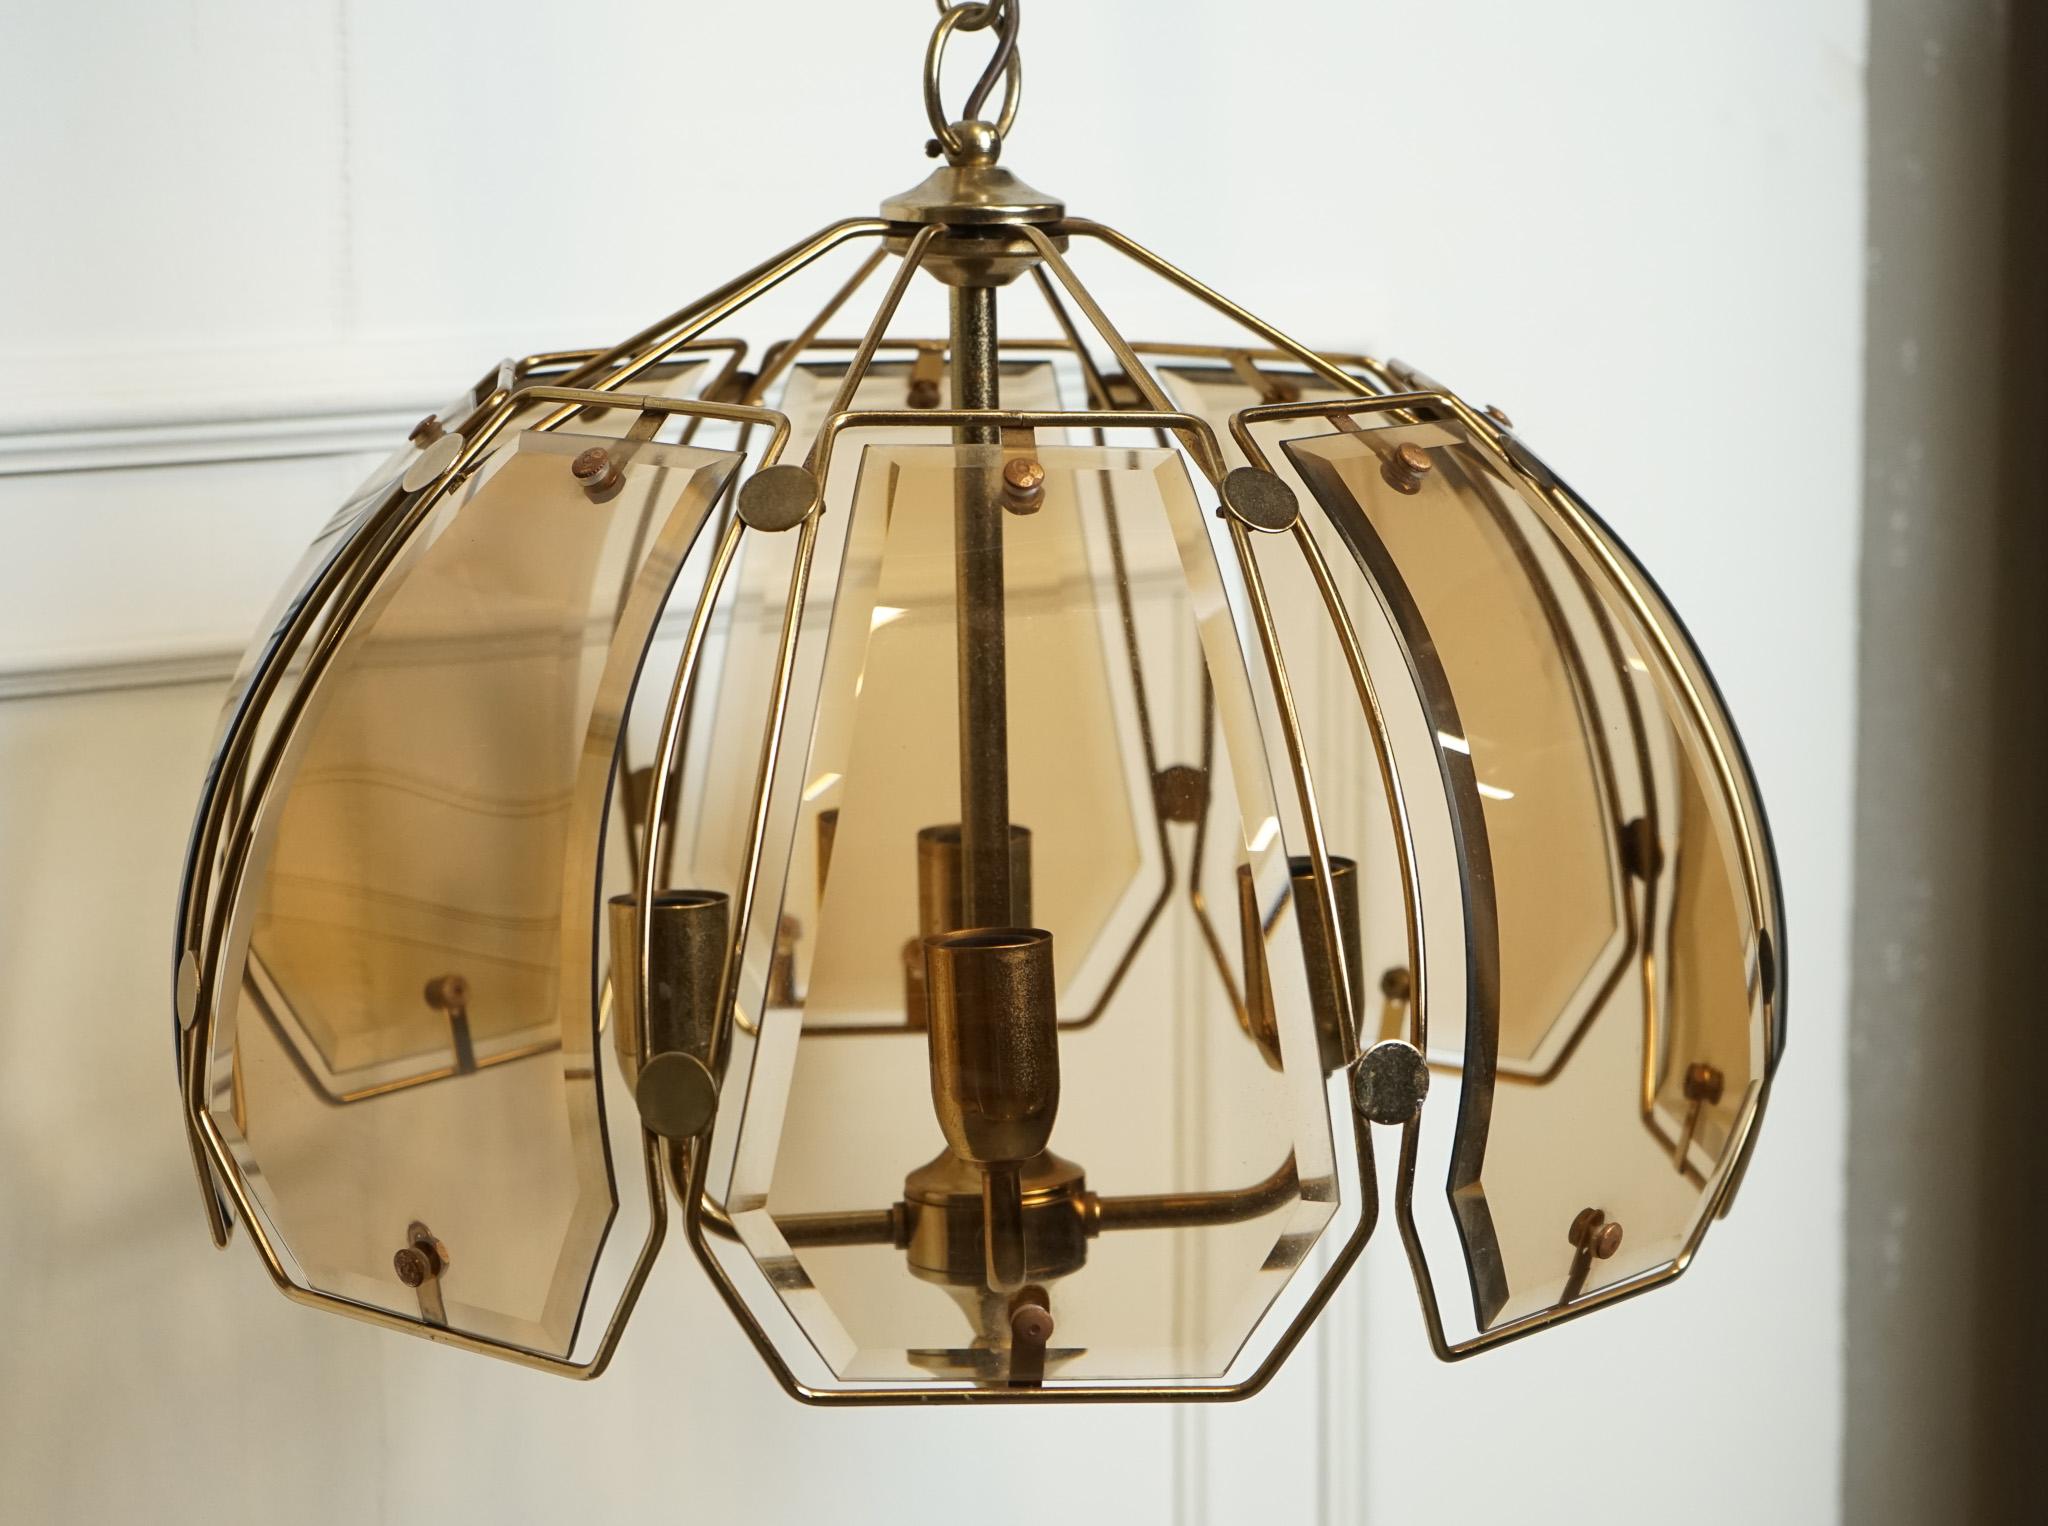 

We are delighted to offer for sale this Art Deco Style Italian Smoked Bevelled Glass Chandelier.

An Art Deco style Italian chandelier features a striking design with smoked bevelled glass elements that give it a luxurious and elegant aesthetic.